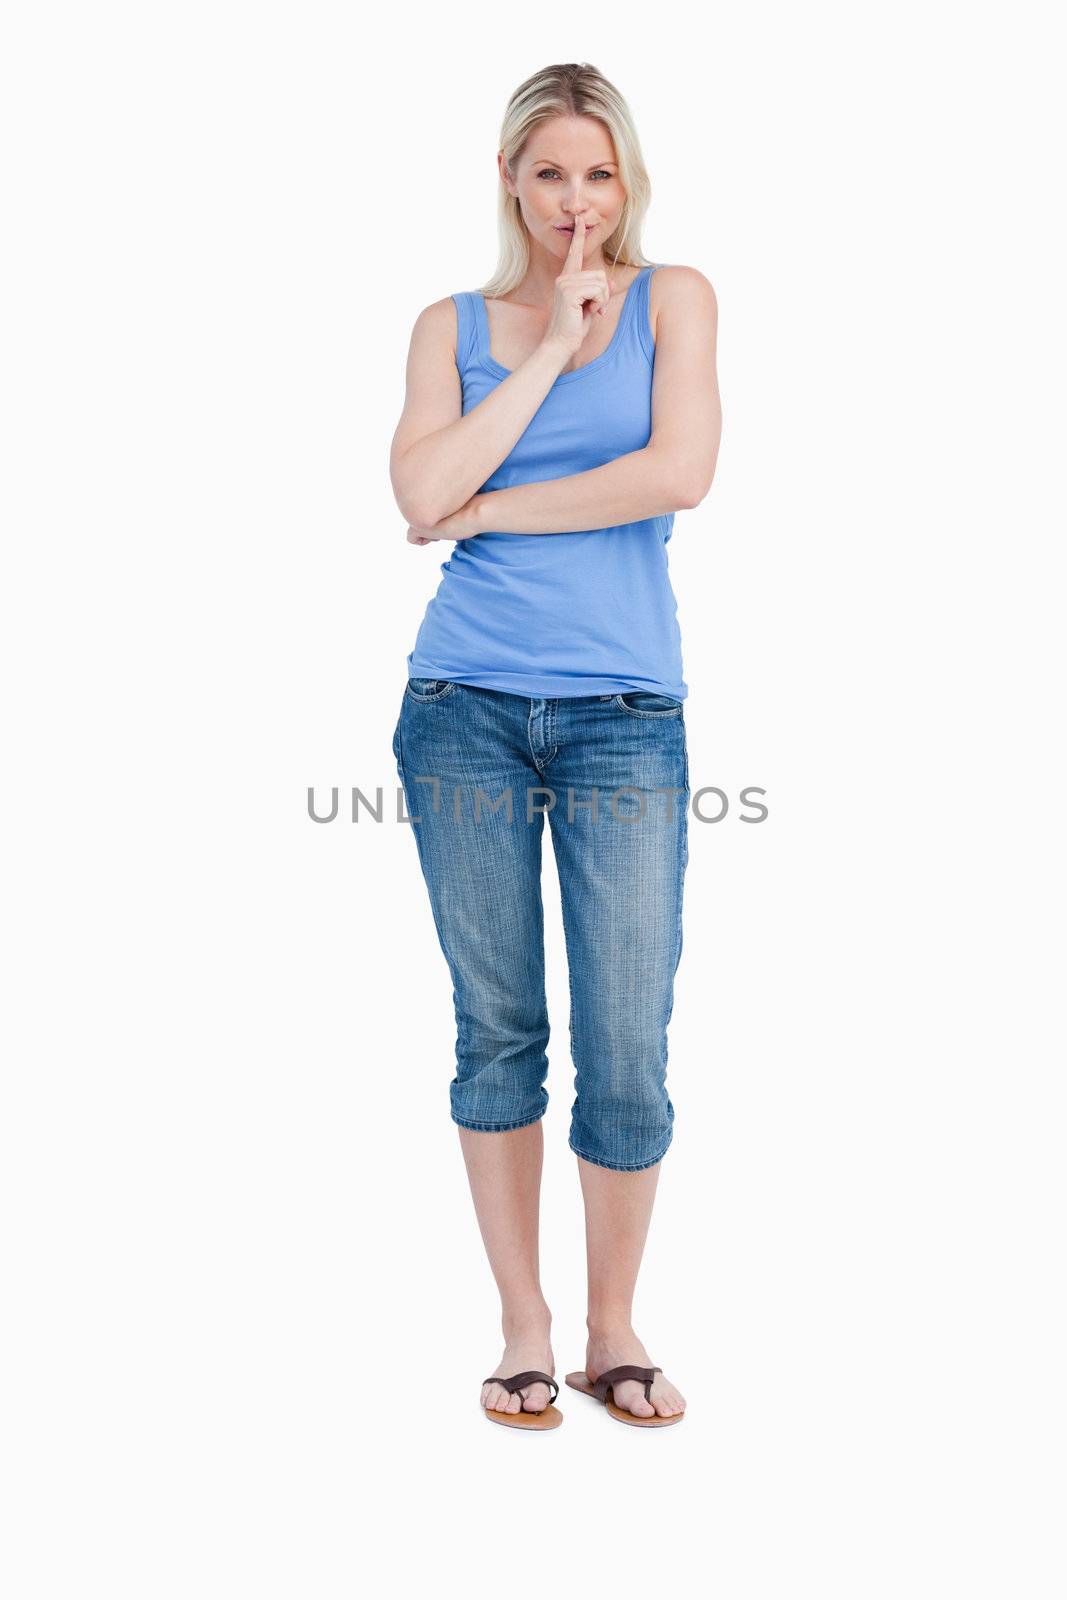 Blonde woman telling to be quiet while crossing arms against a white background